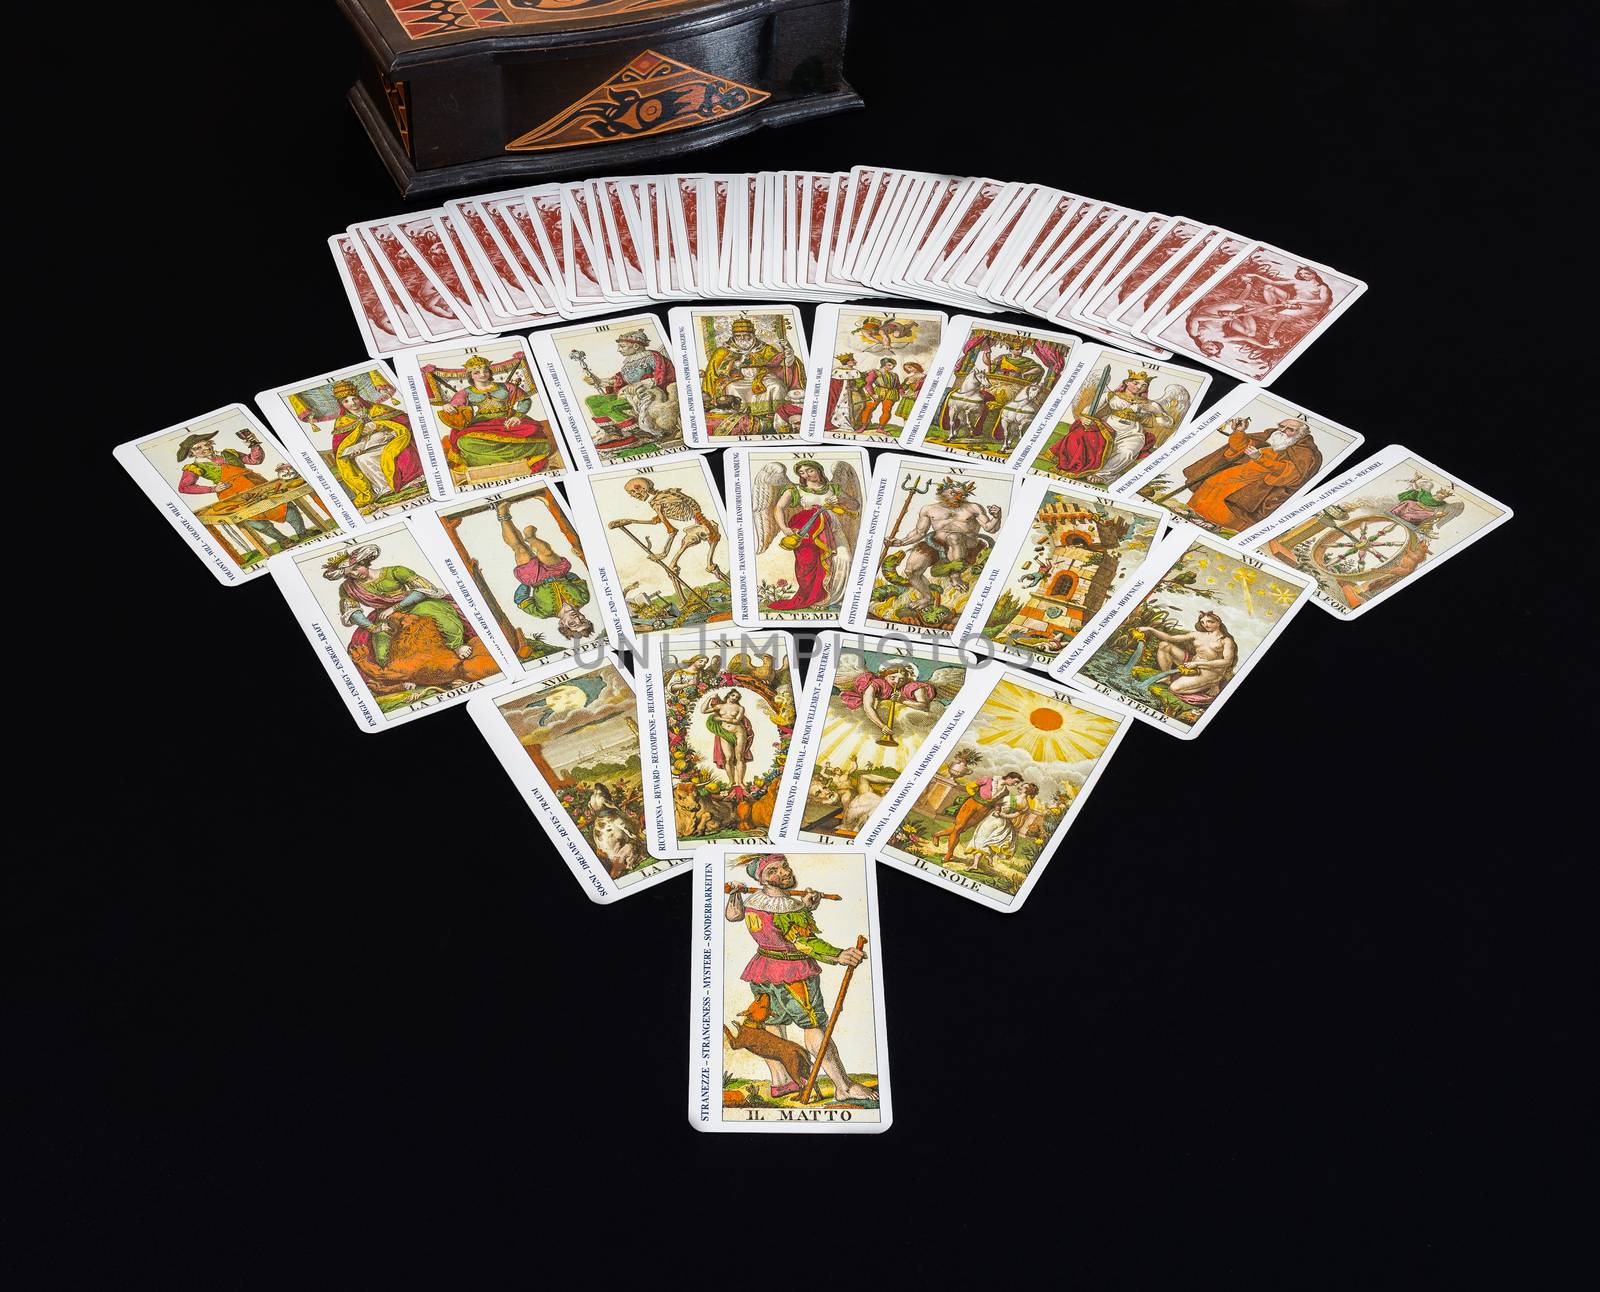 The game of tarot cards with all of its 22 major arcana